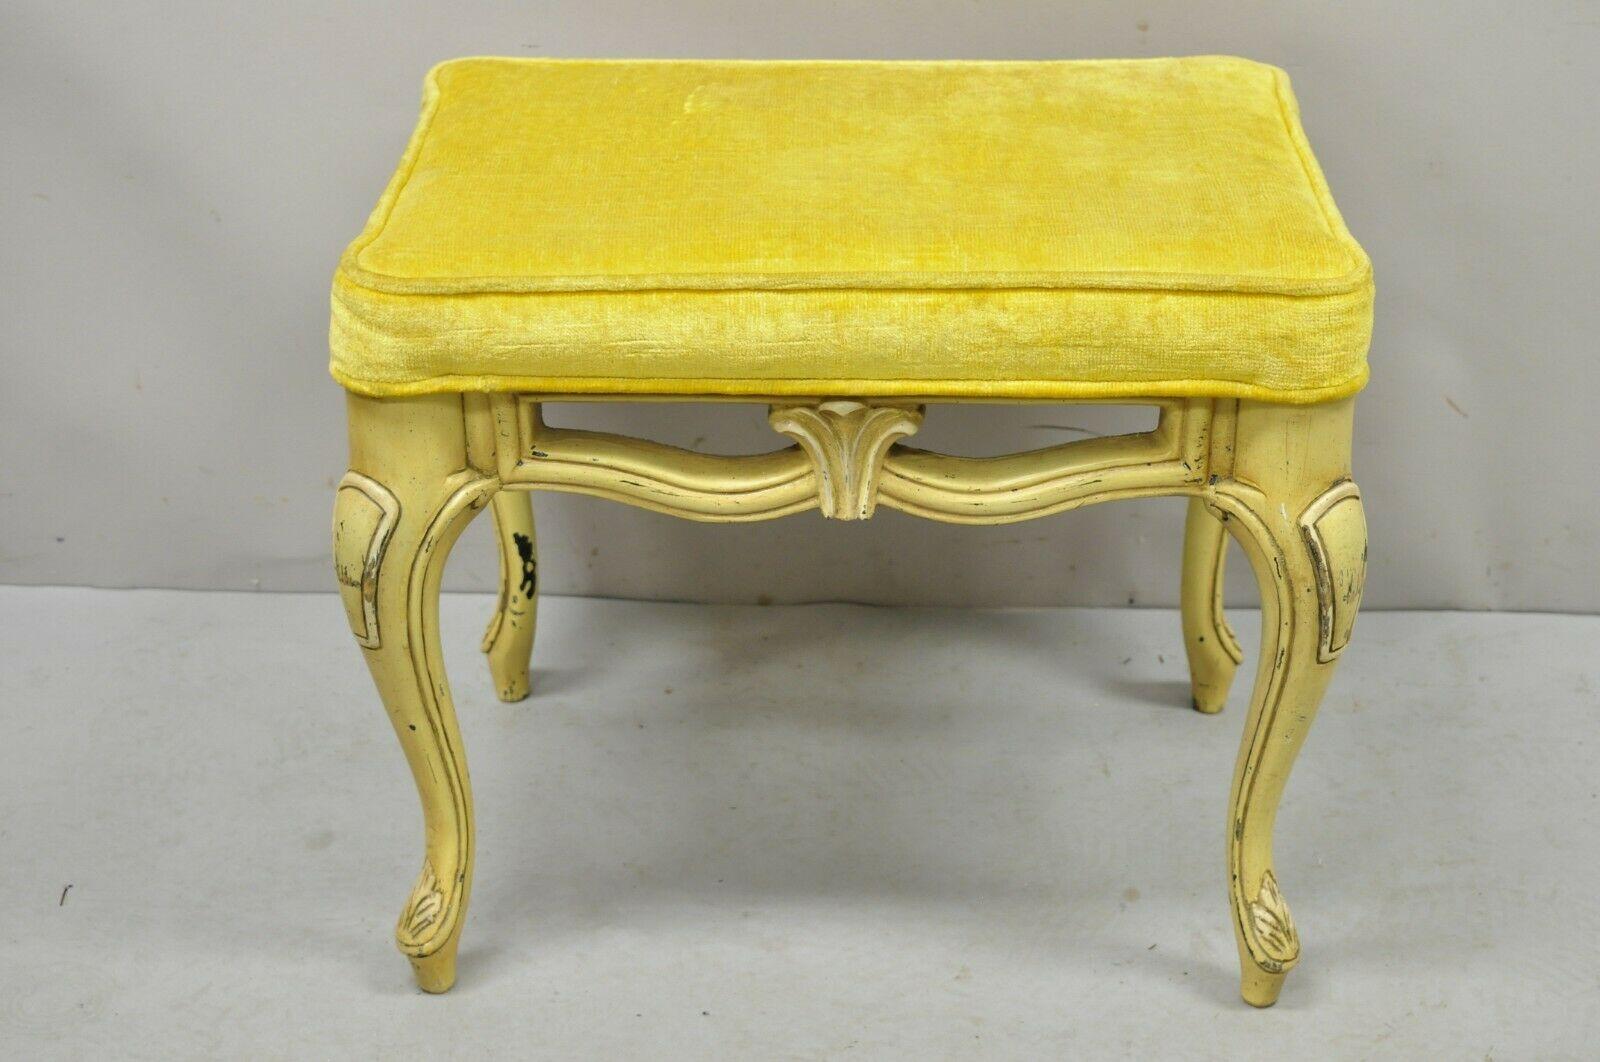 Vintage French Provincial yellow painted cabriole leg vanity bench seat. Item features wood and molded plastic frame, upholstered seat, cabriole legs, very nice vintage item, great style and form. Circa mid to late 20th century. Measurements: 18